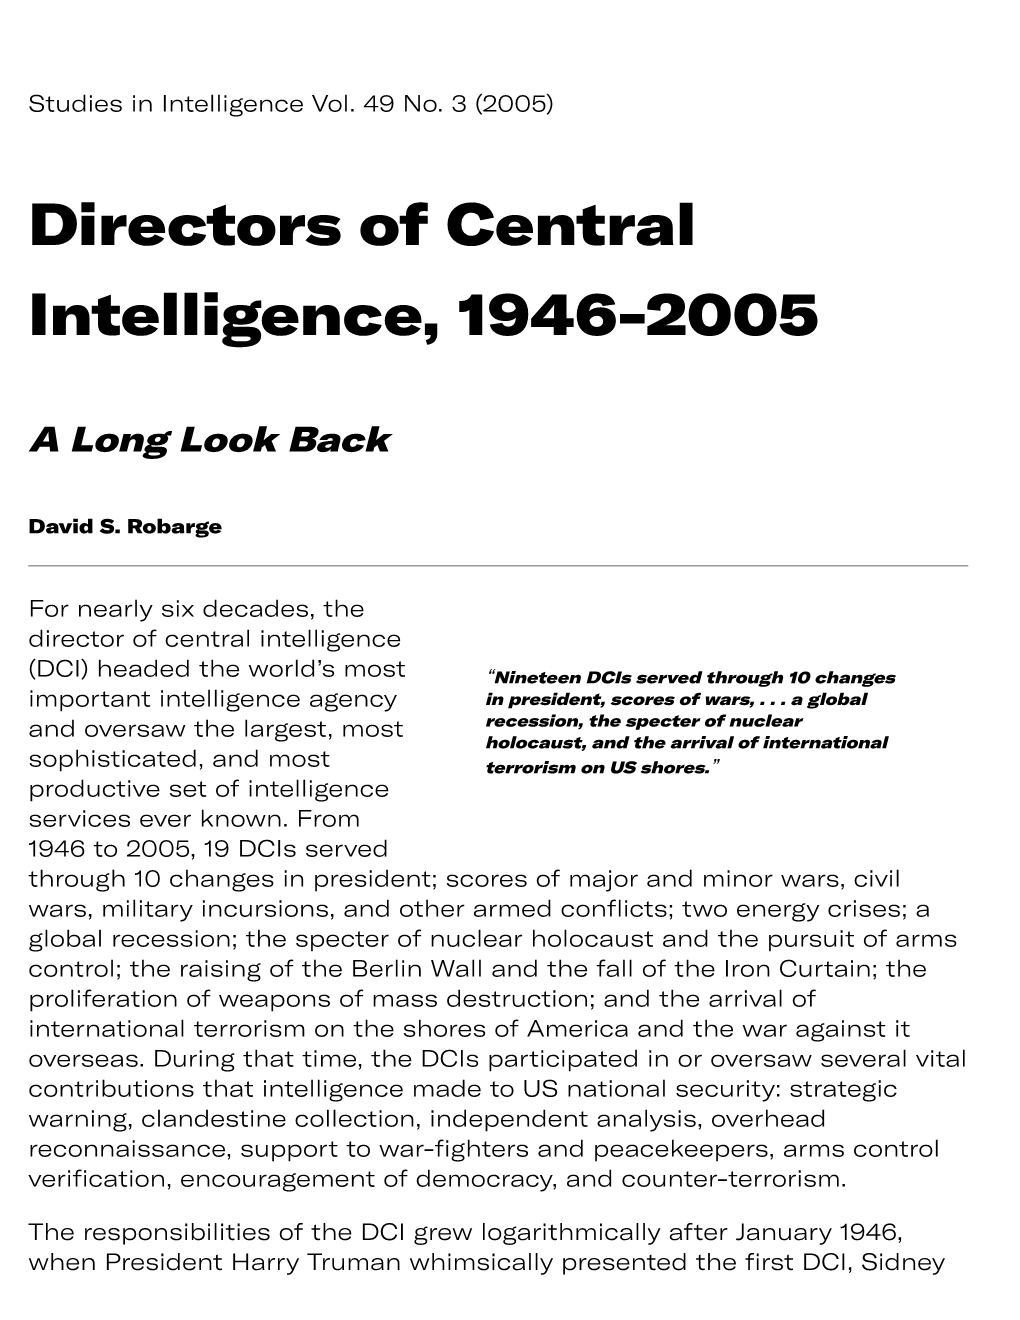 Directors of Central Intelligence, 1946-2005